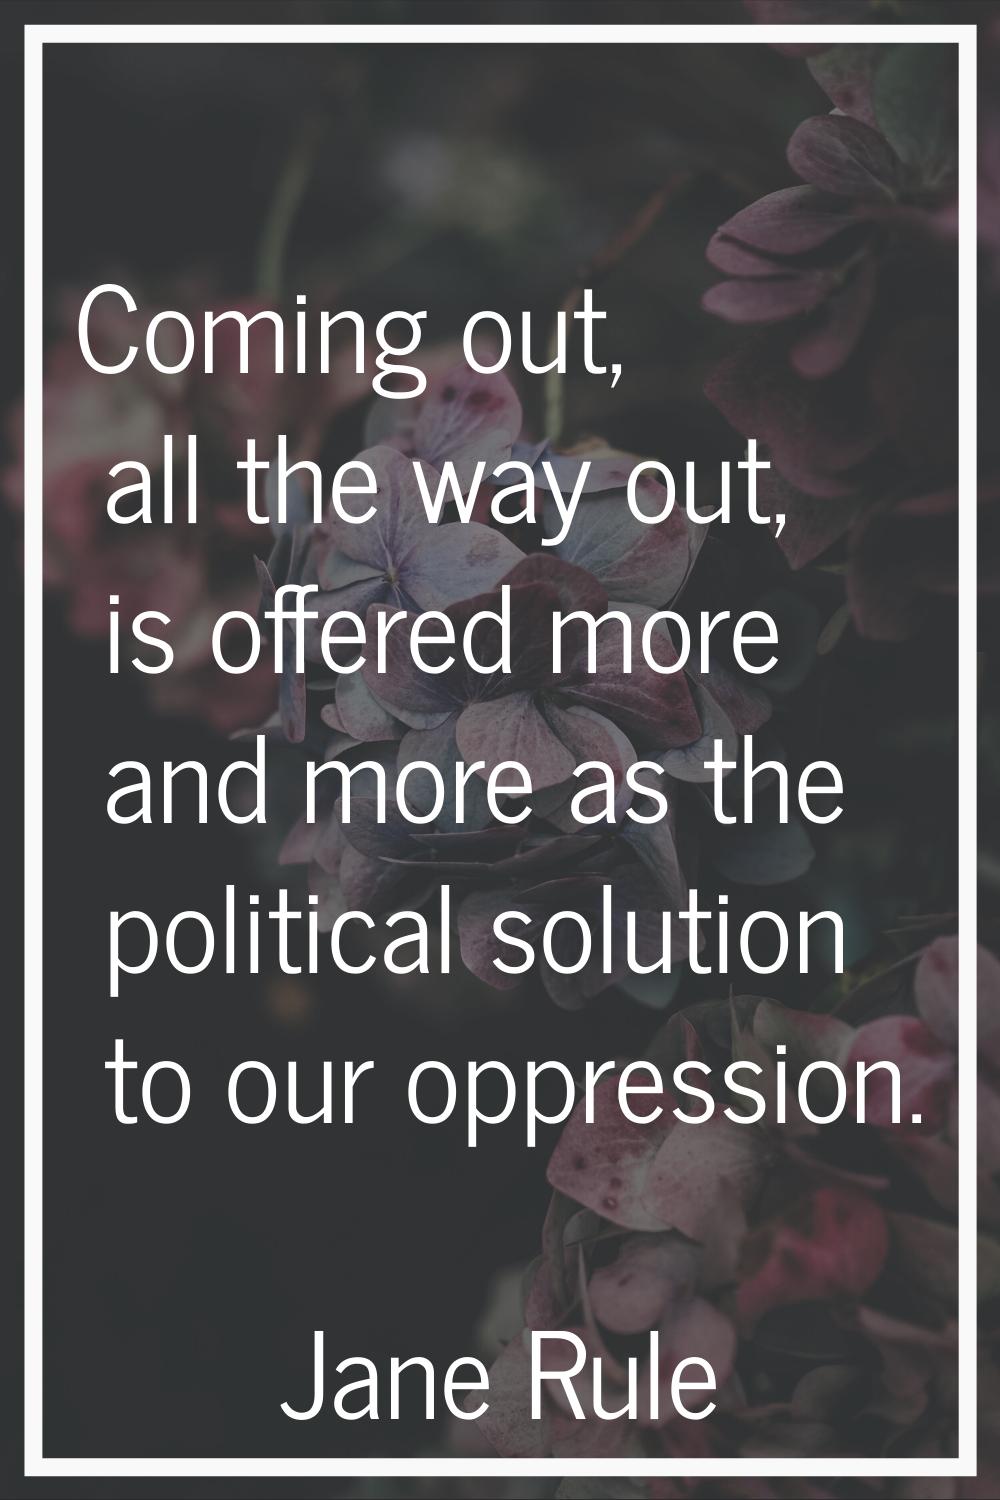 Coming out, all the way out, is offered more and more as the political solution to our oppression.